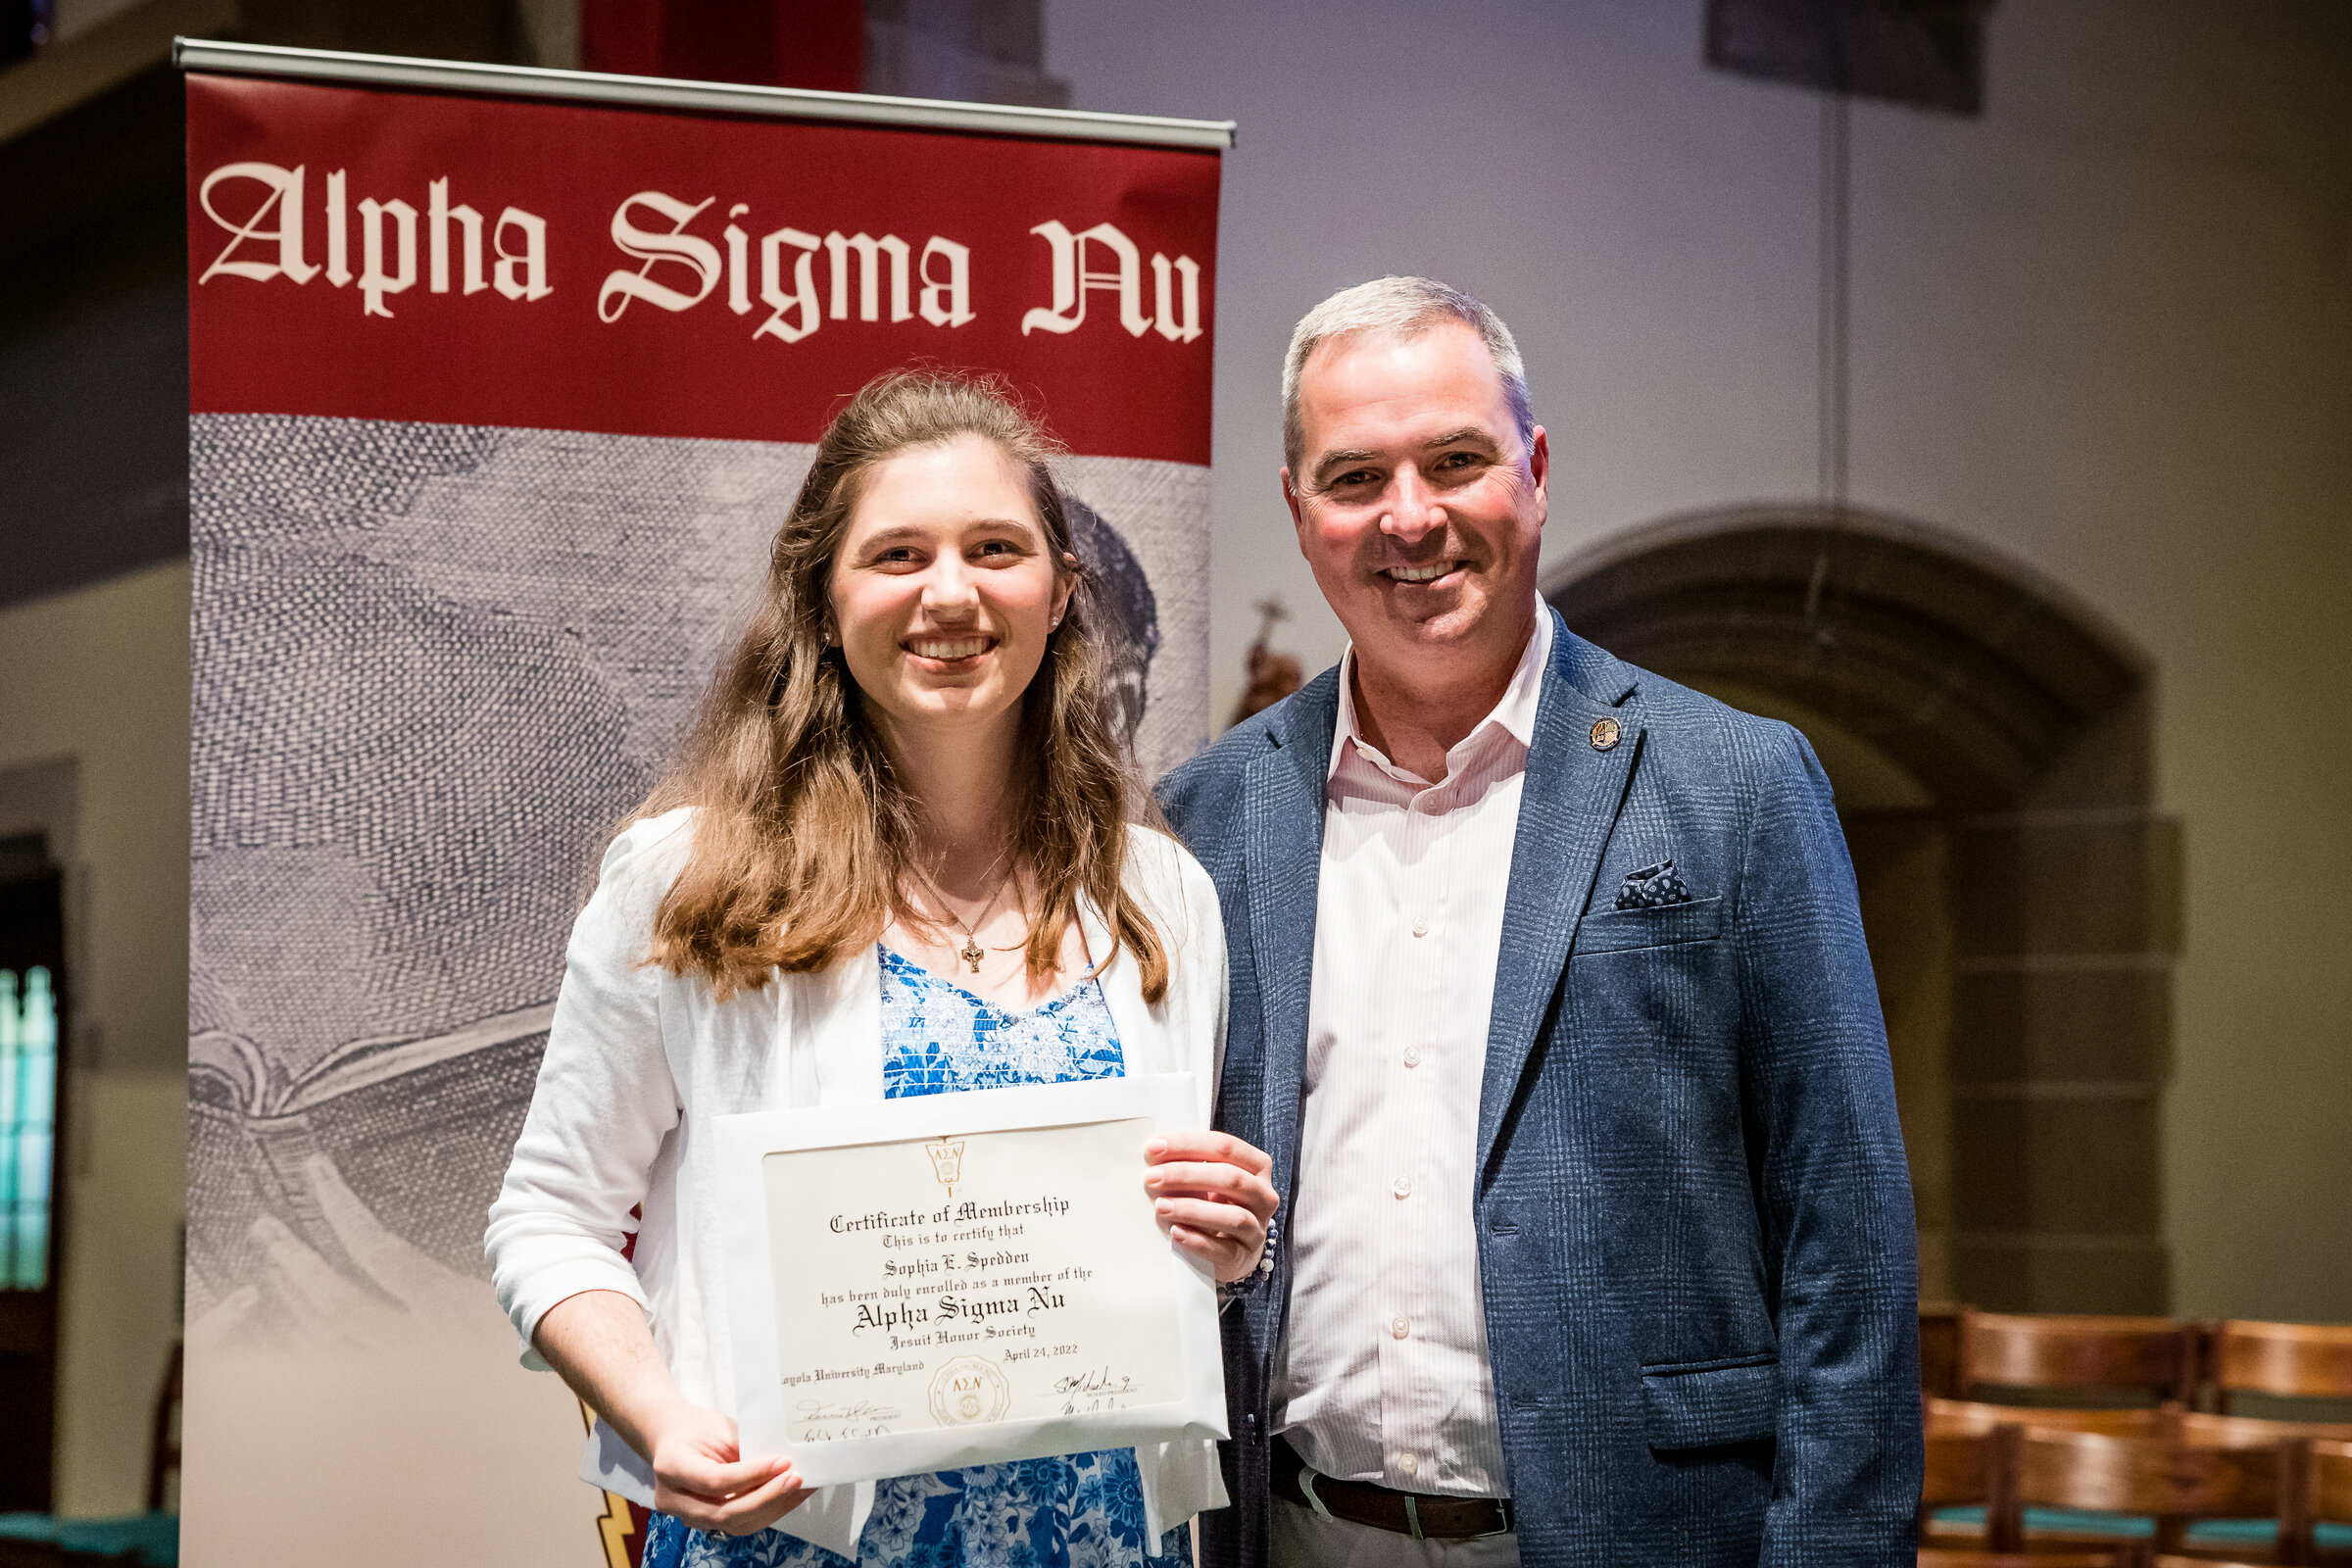 Loyola's President standing next to an Alpha Sigma Nu member holding their certificate